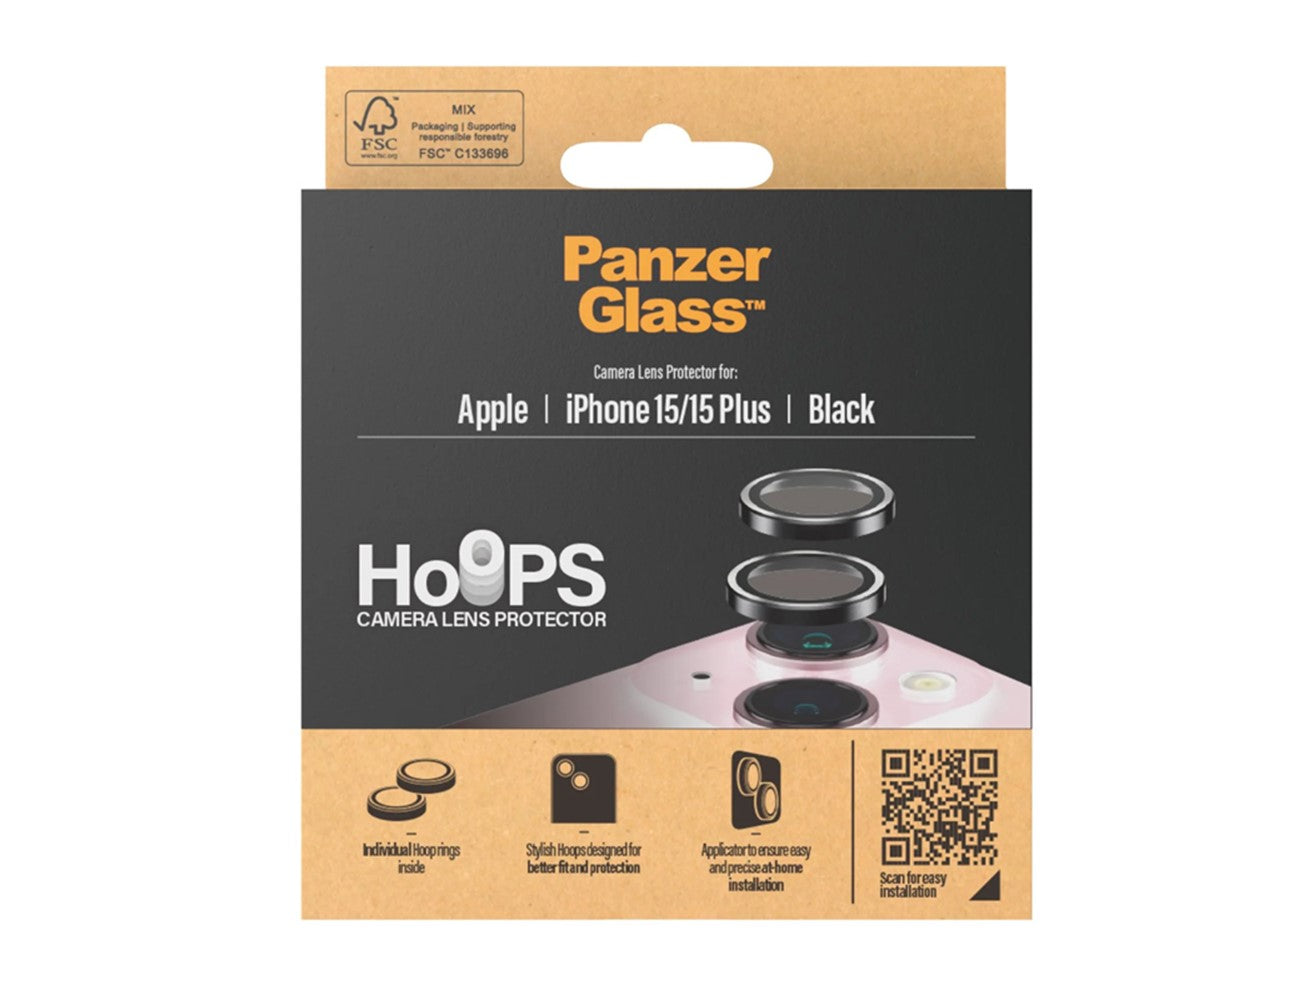 PanzerGlass Hoops Camera Lens Protector for Apple iPhone 15 / 15 Plus